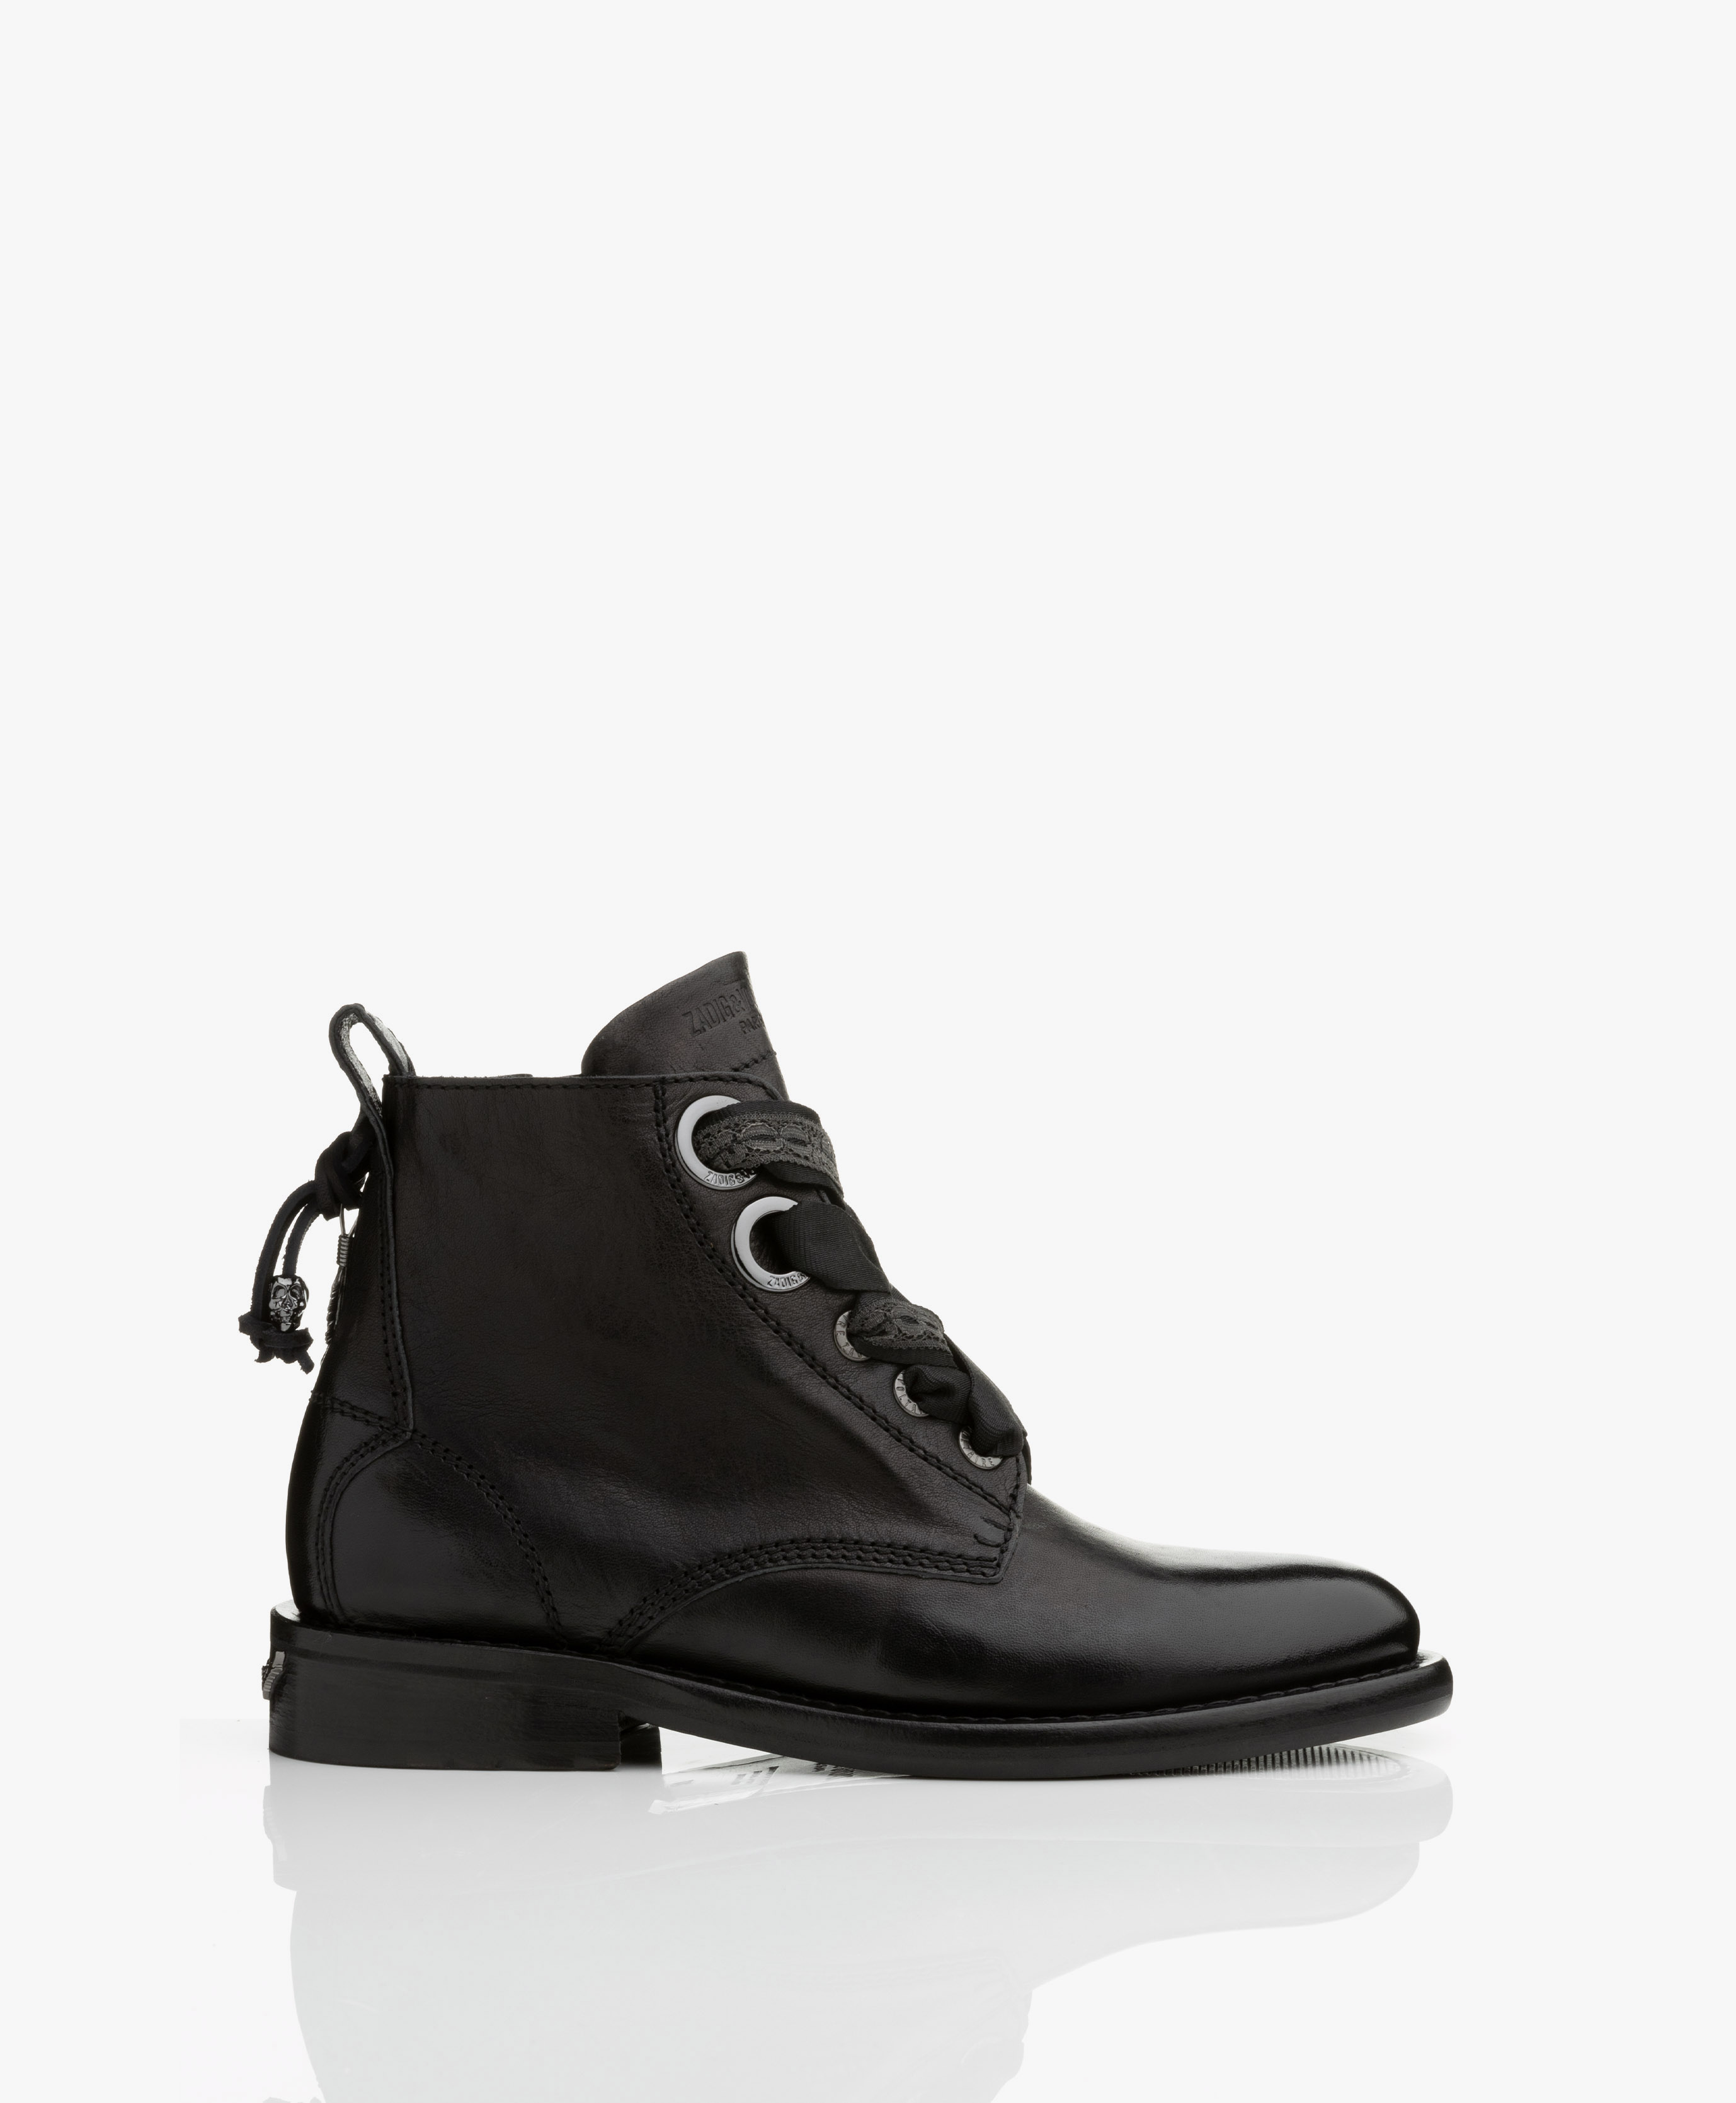 Zadig & Voltaire Laureen Roma Lace-up Boots - Black laureen | pwgaa1702f | swct00001